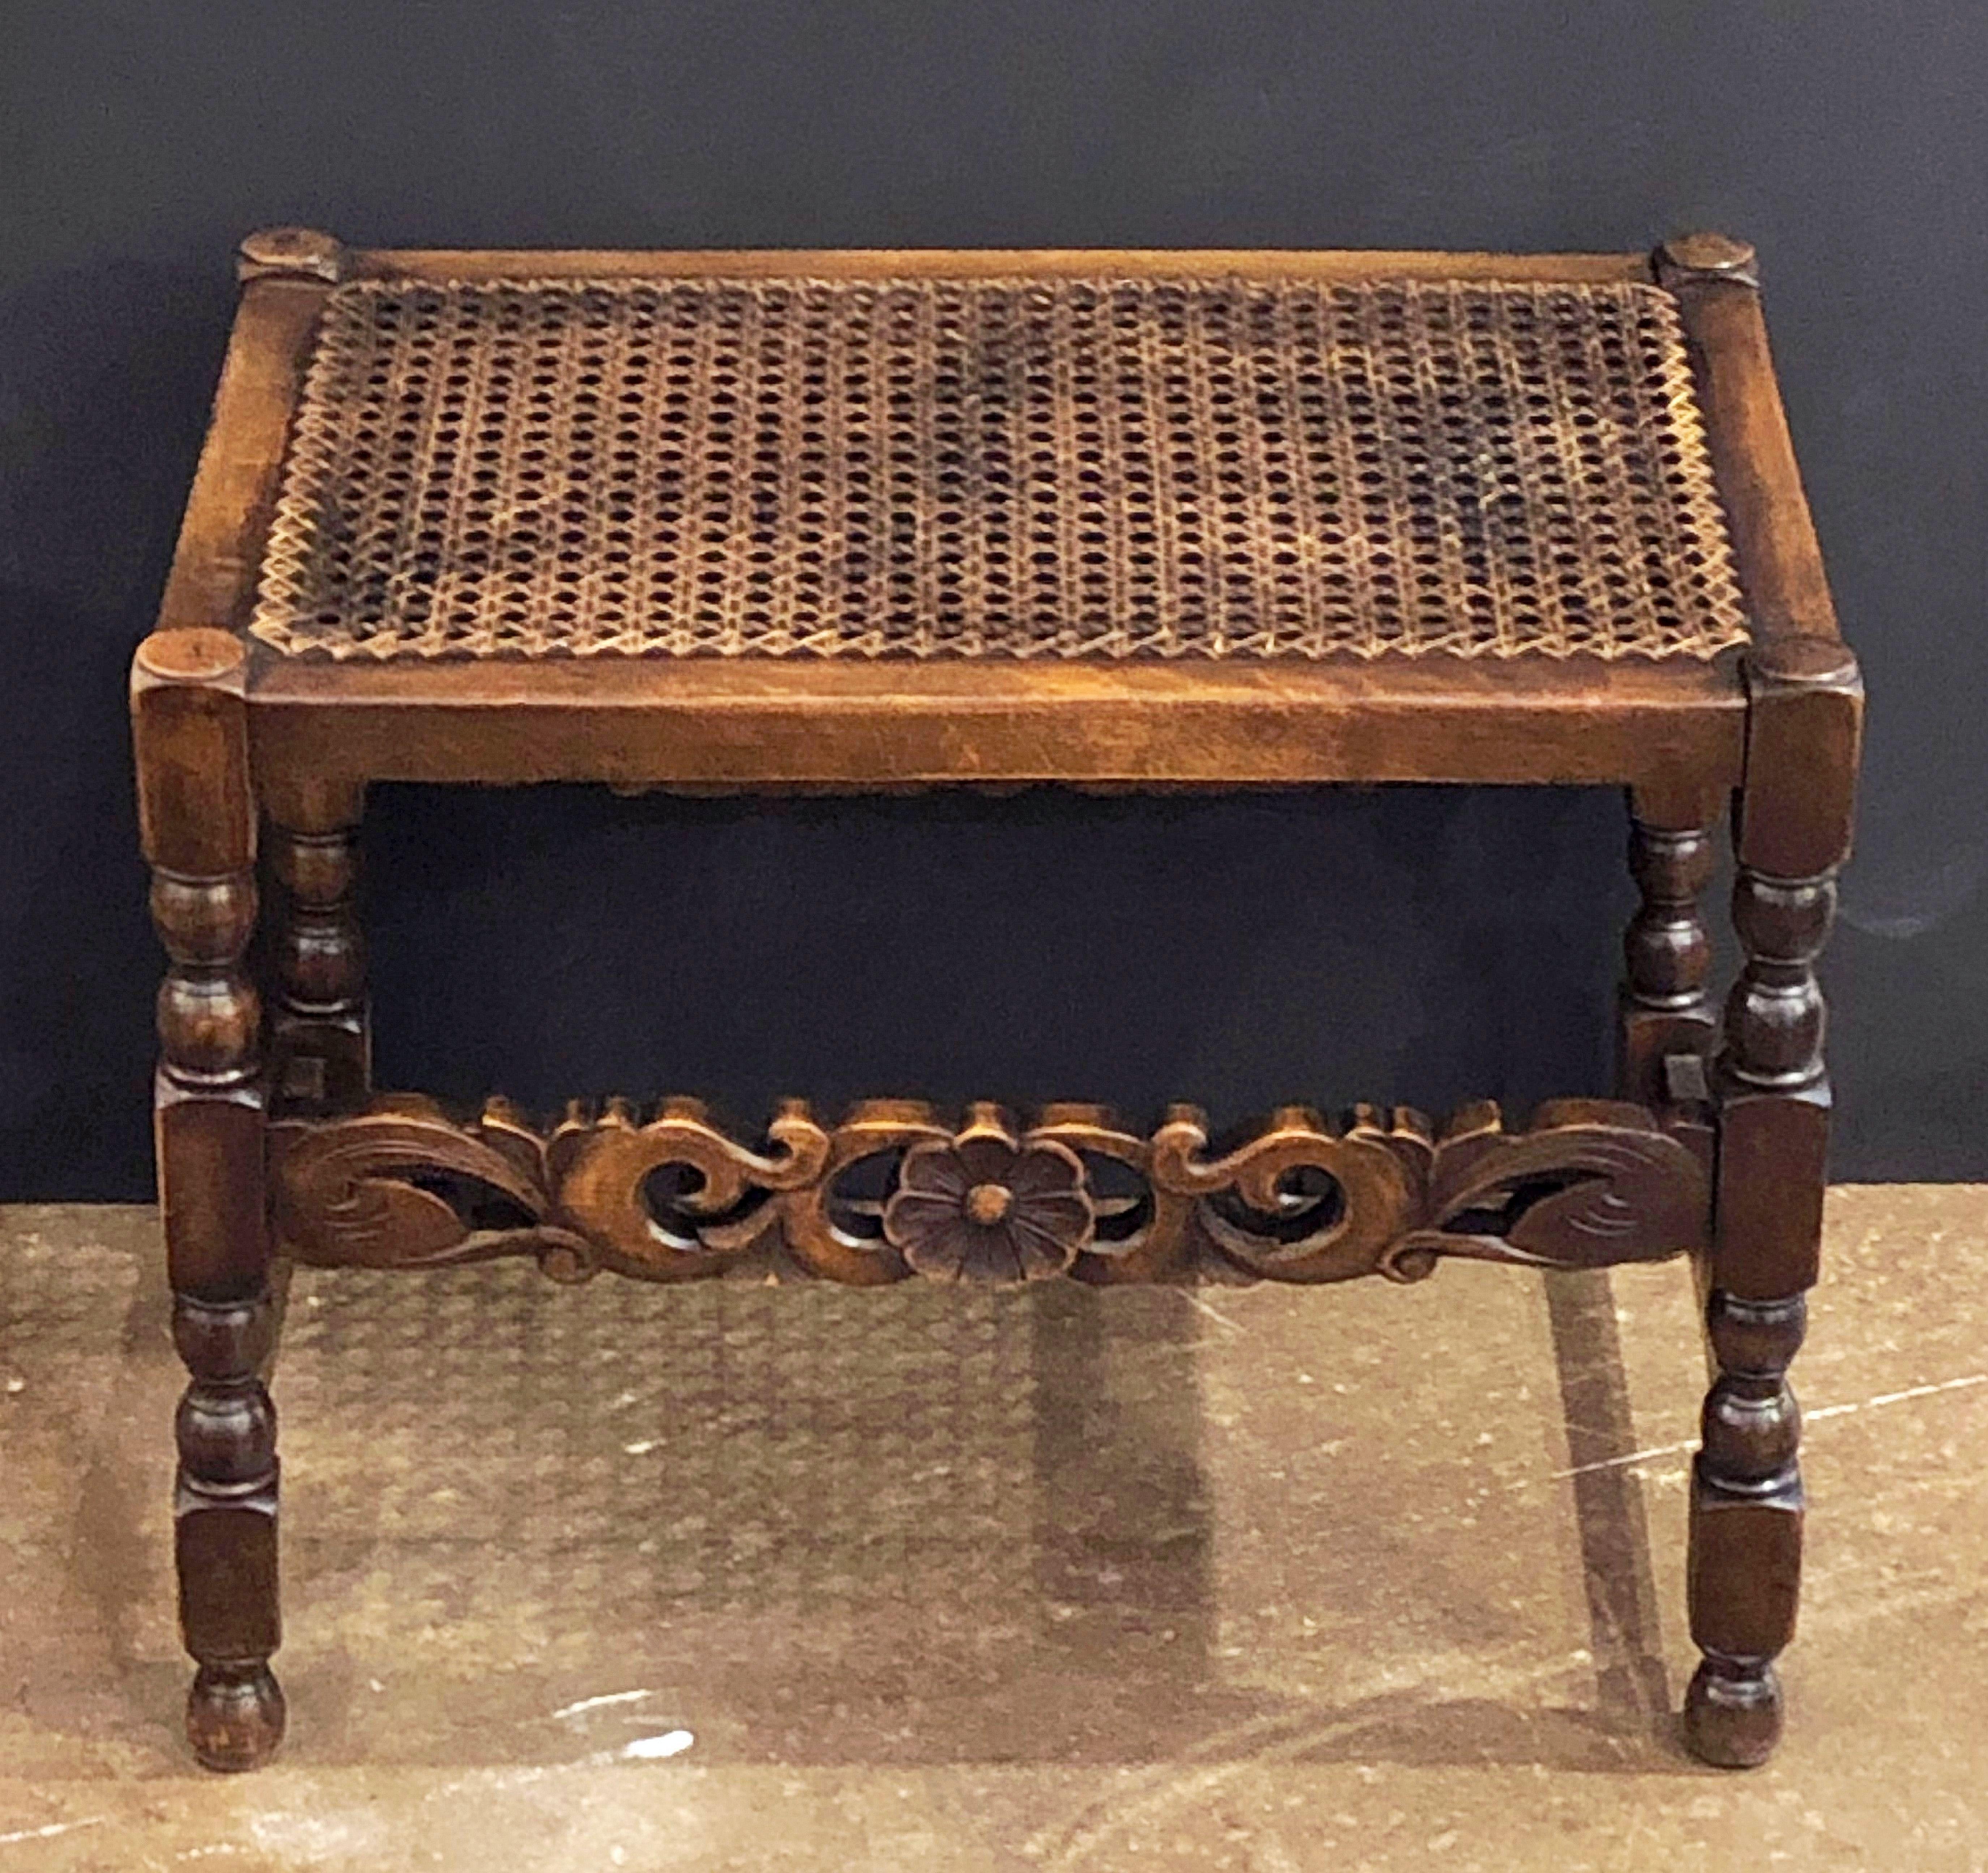 20th Century English Caned Bergere Seat or Bench with Carved Wood Stretcher